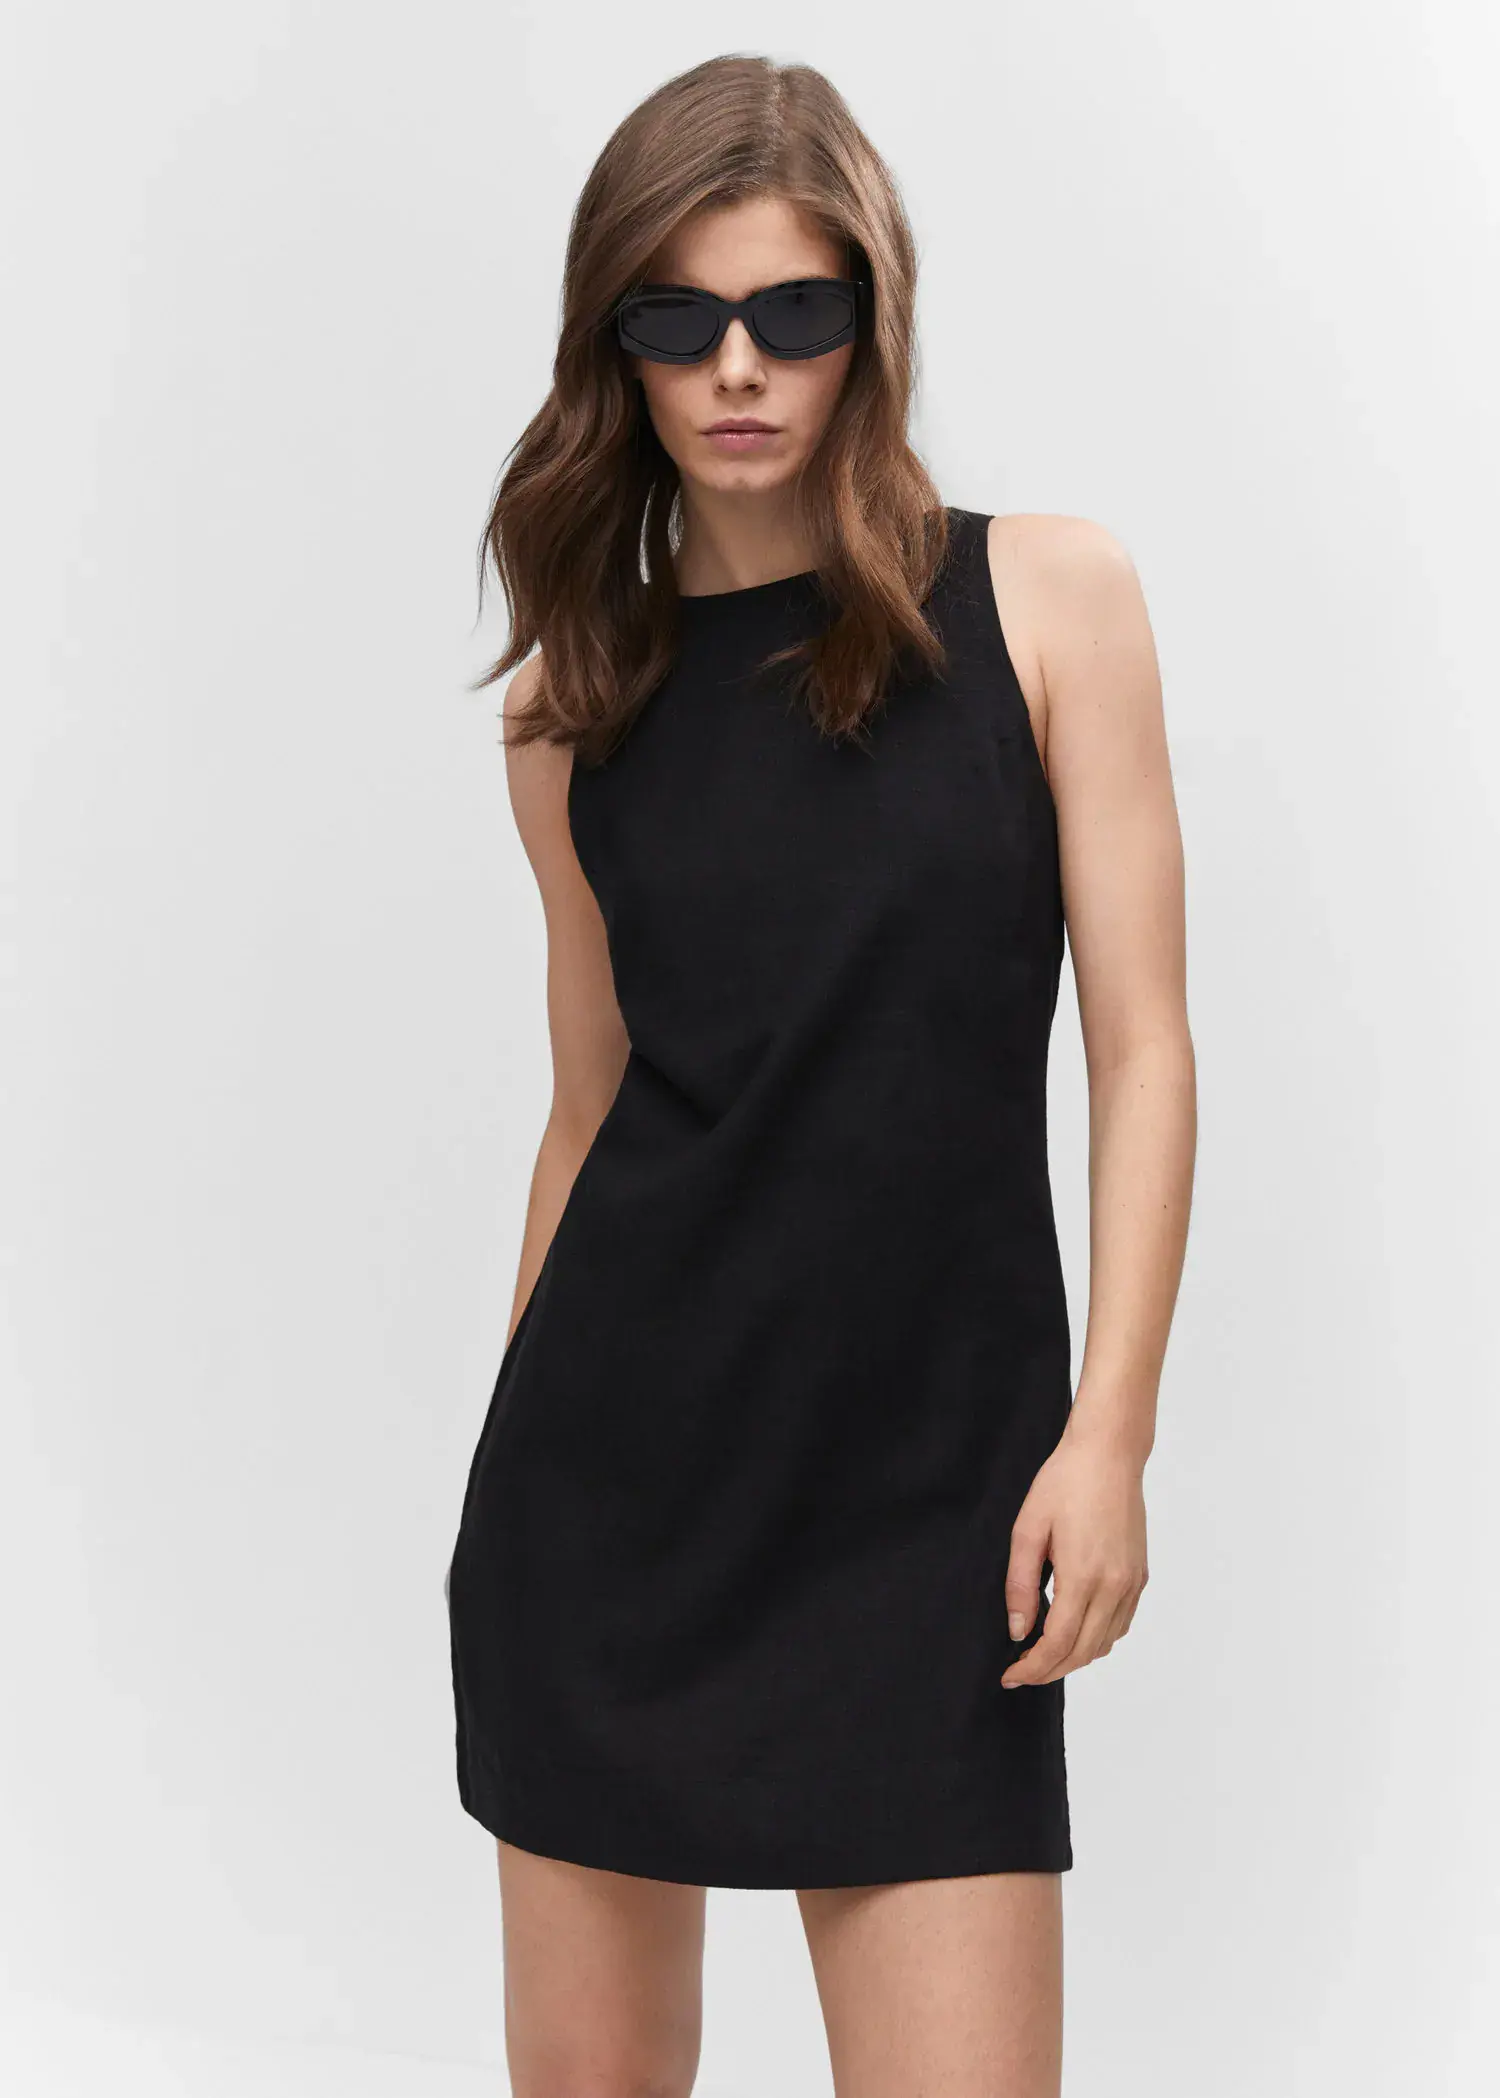 Mango Linen dress with back opening. a woman wearing a black dress and sunglasses. 